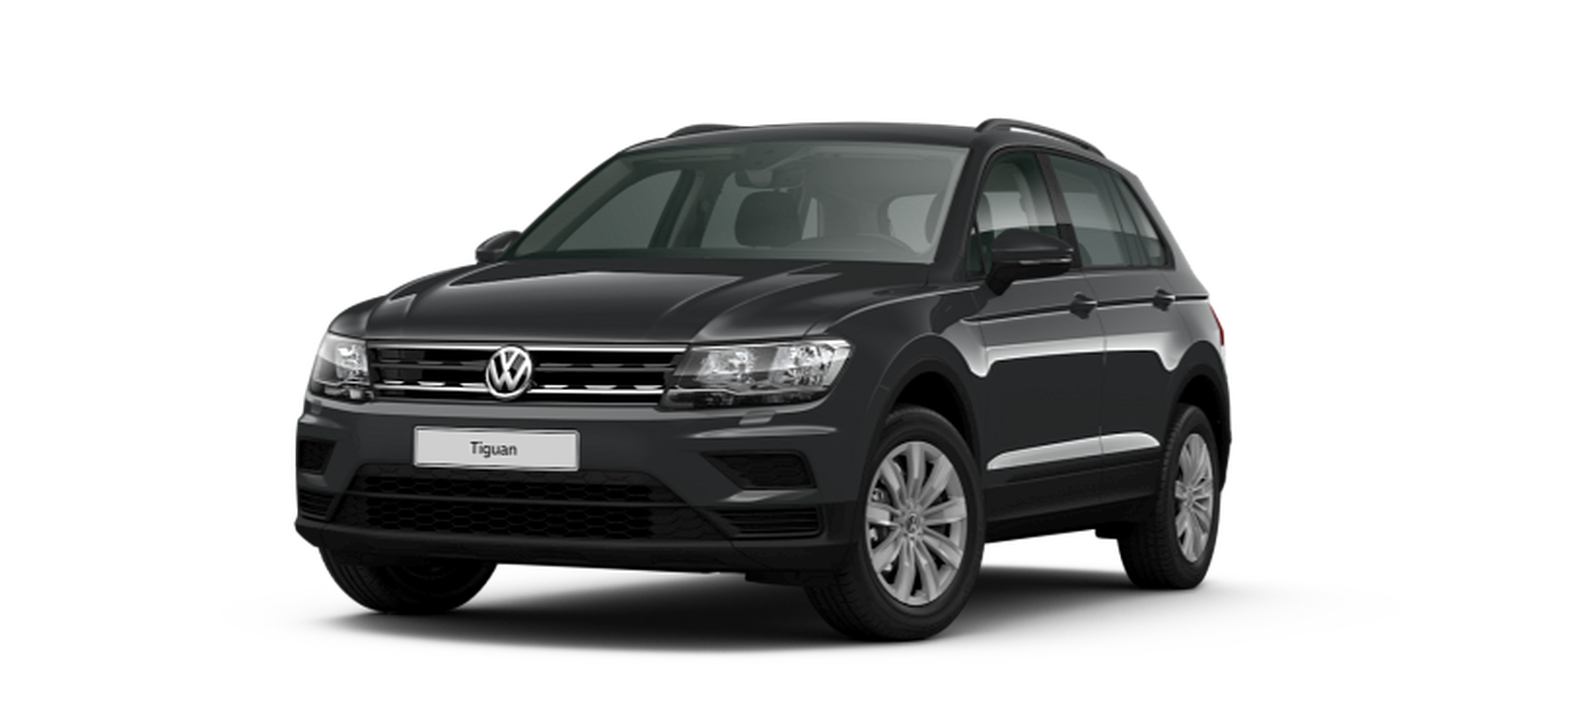 https://cf-static-cms.dasweltauto.at/Plone/at/assets/seo-landingpages/vw-tiguan-frontansicht.png/@@images/ecfeabdd-2337-4d9d-a723-2ab257107a42.png